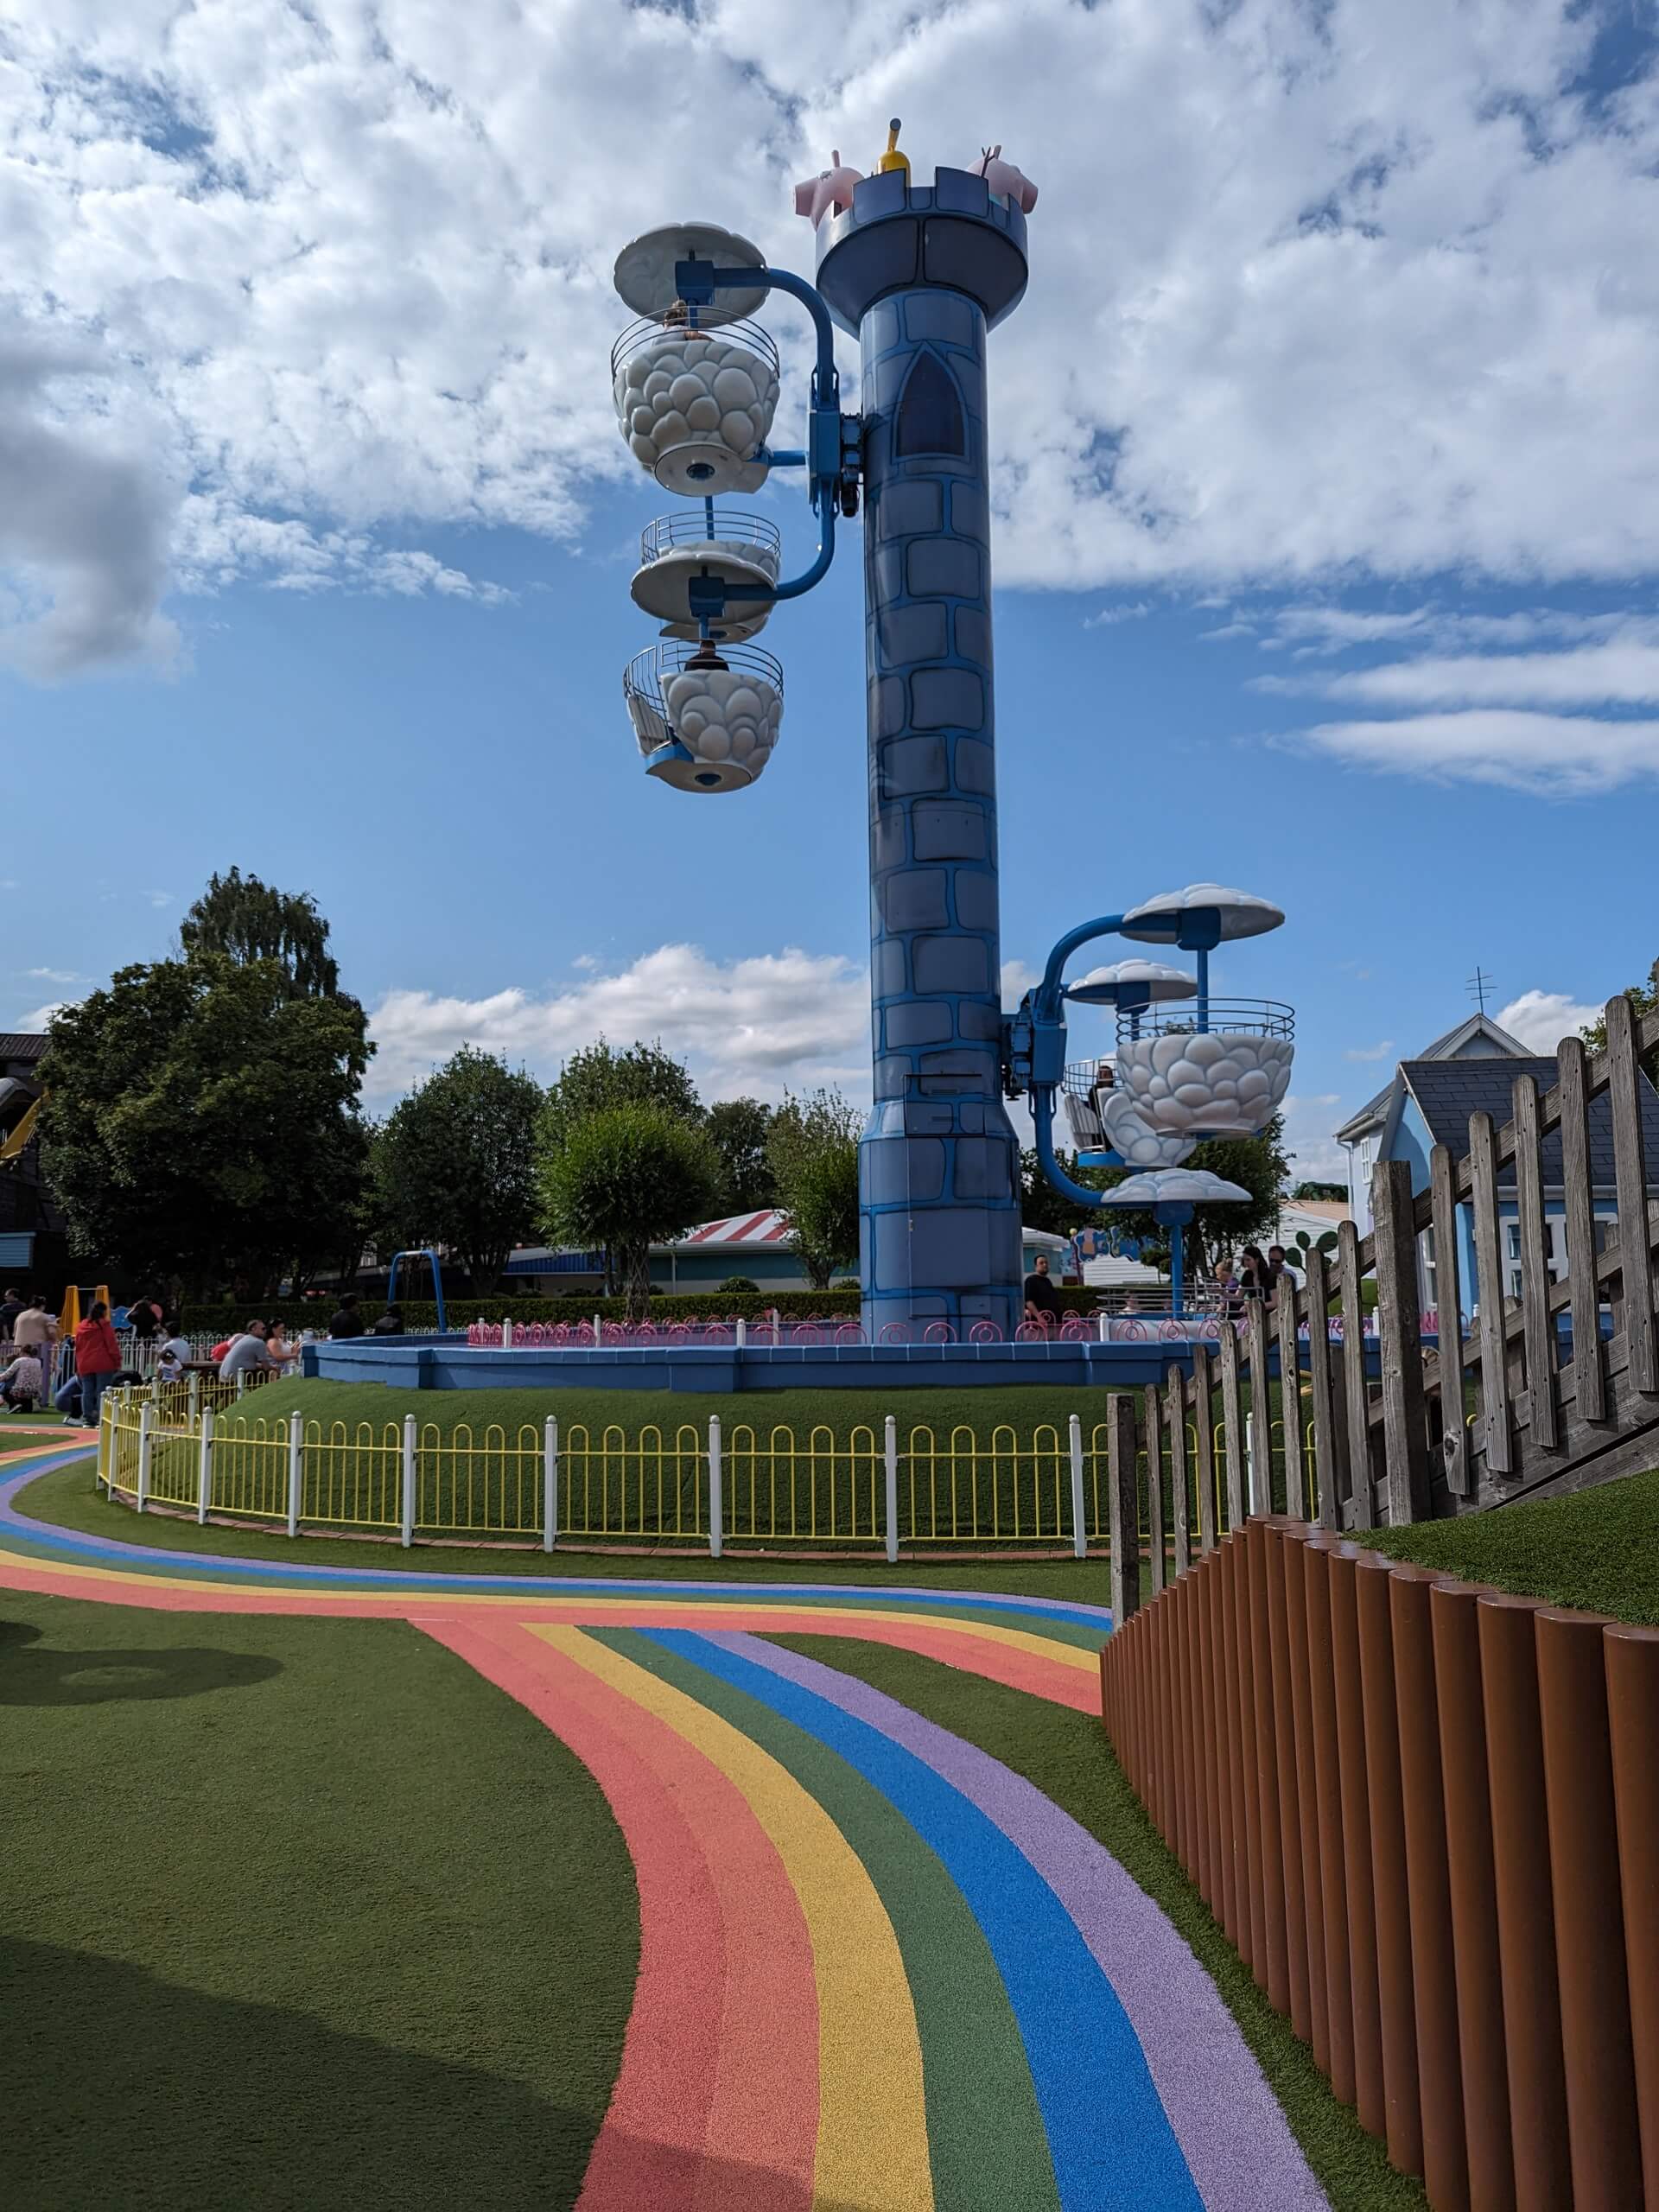 tips for peppa pig world